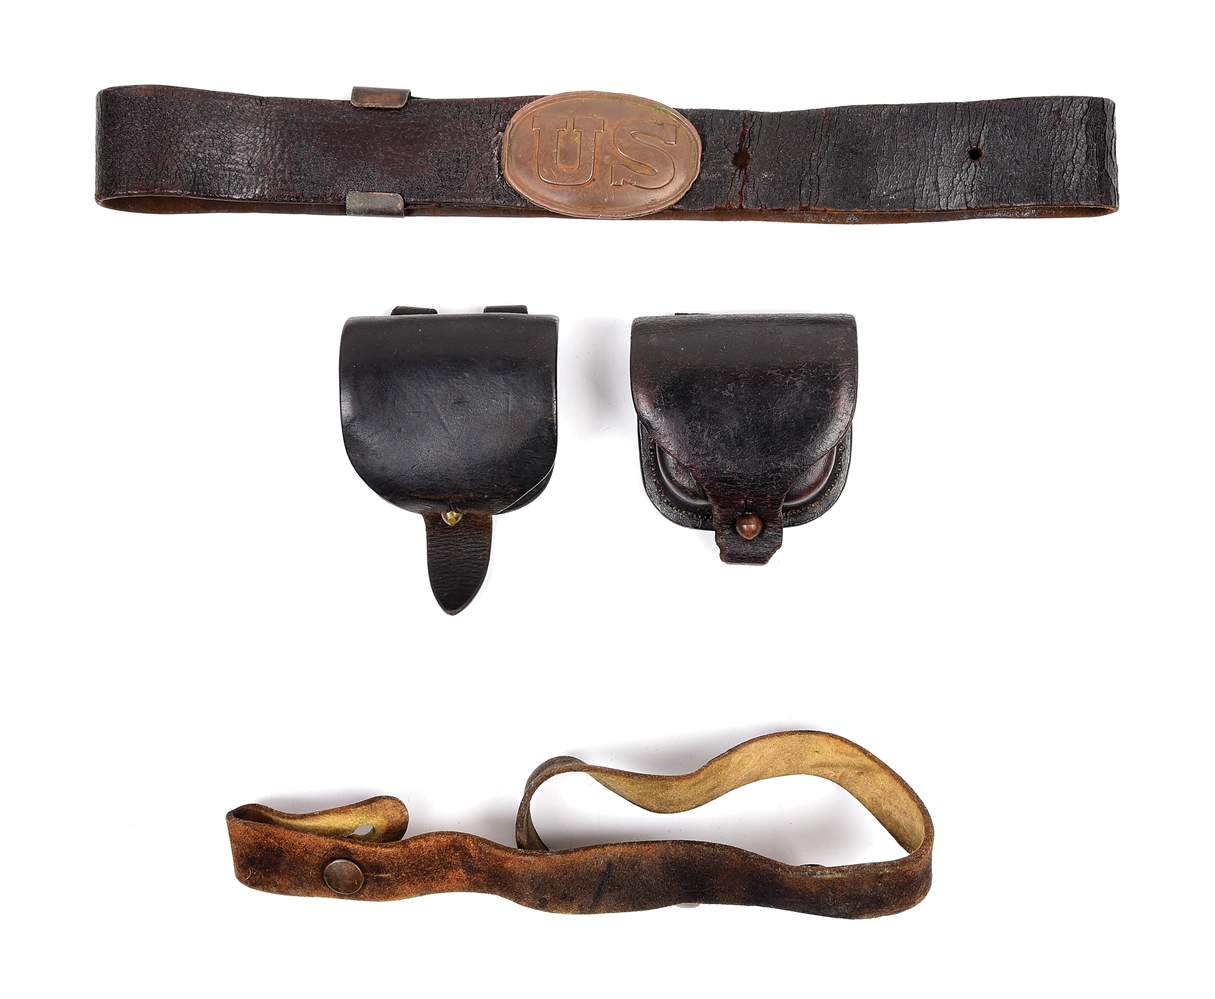 LOT OF 4: 2 CIVIL WAR CAP BOXES, ENLISTED BELT AND PLATE, AND DRAGOON SWORD HANGER.